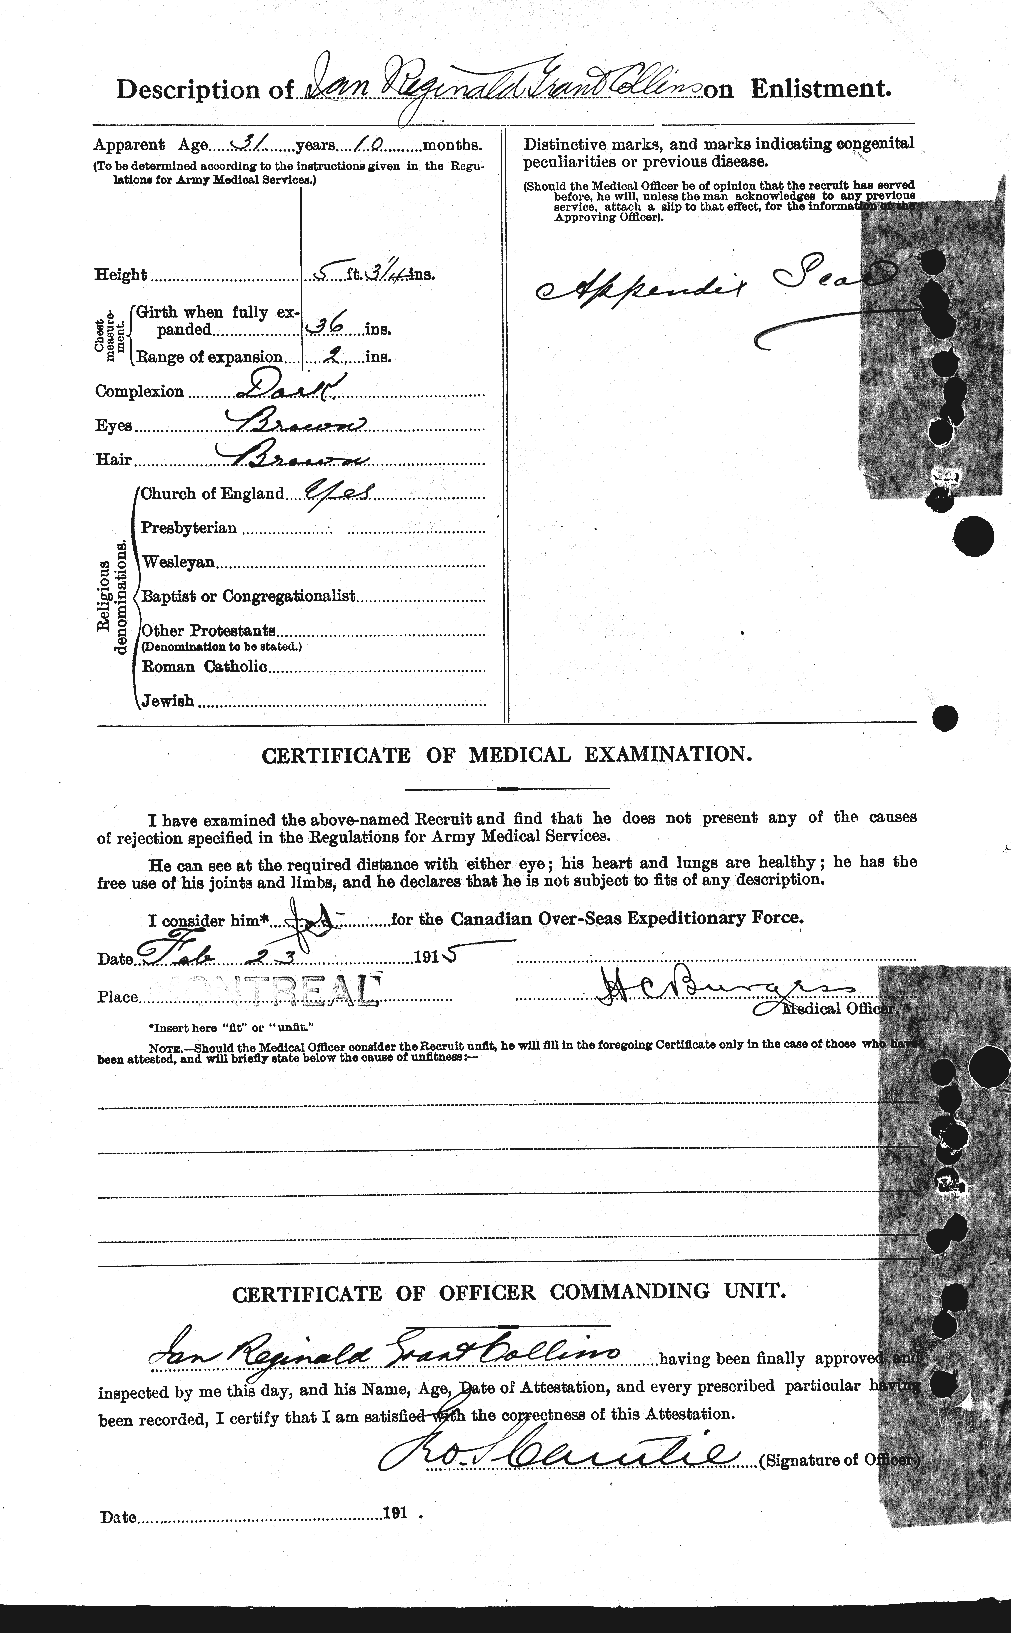 Personnel Records of the First World War - CEF 069991b